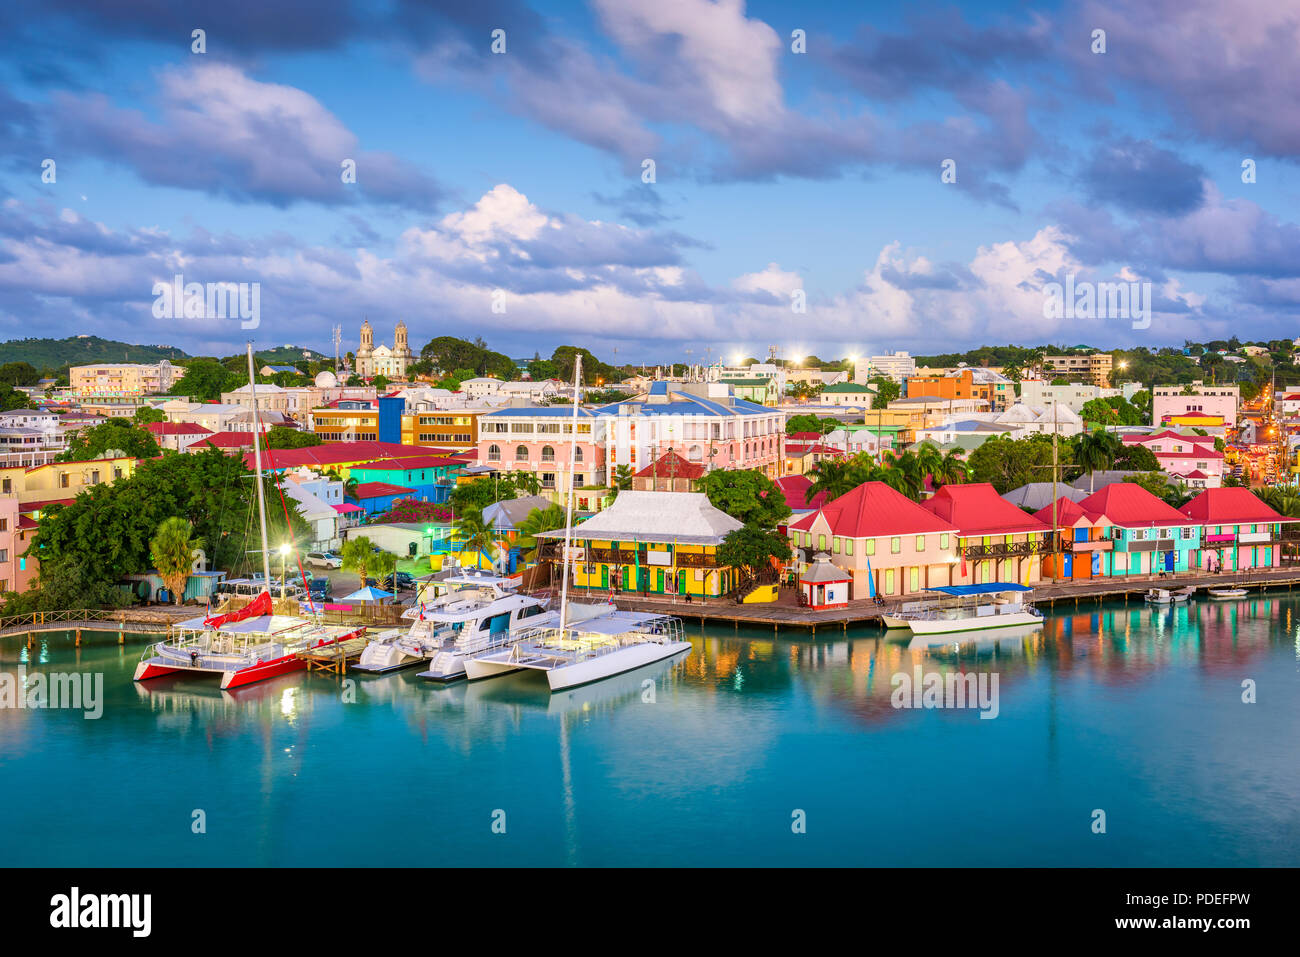 St. John's, Antigua and Barbuda town skyline on Redcliffe Quay at dusk. Stock Photo